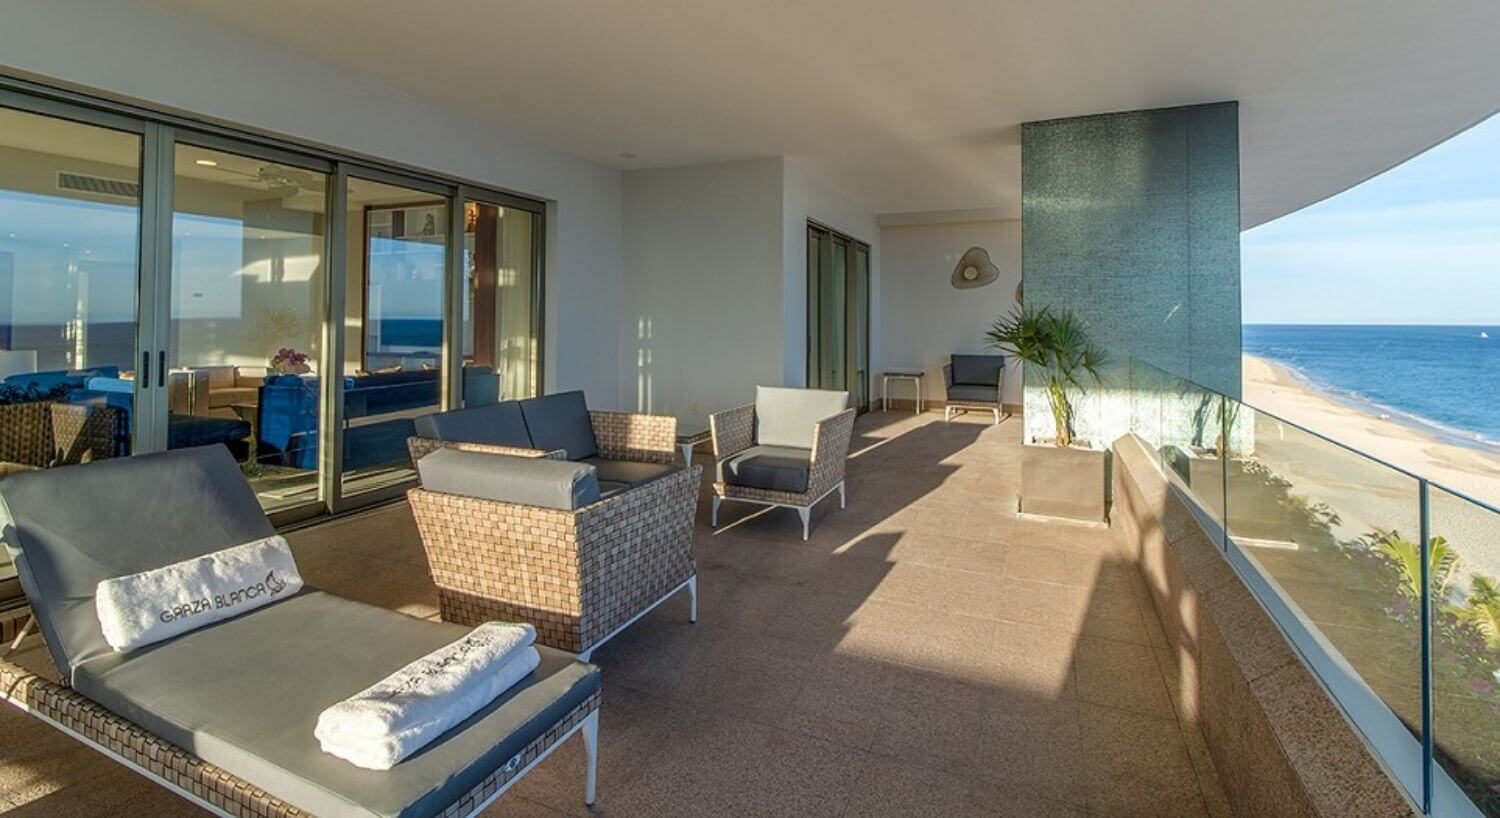 A spacious balcony with patio furniture, lounge chairs, sliding doors open doors into a living room, and views of the sandy beach and ocean.